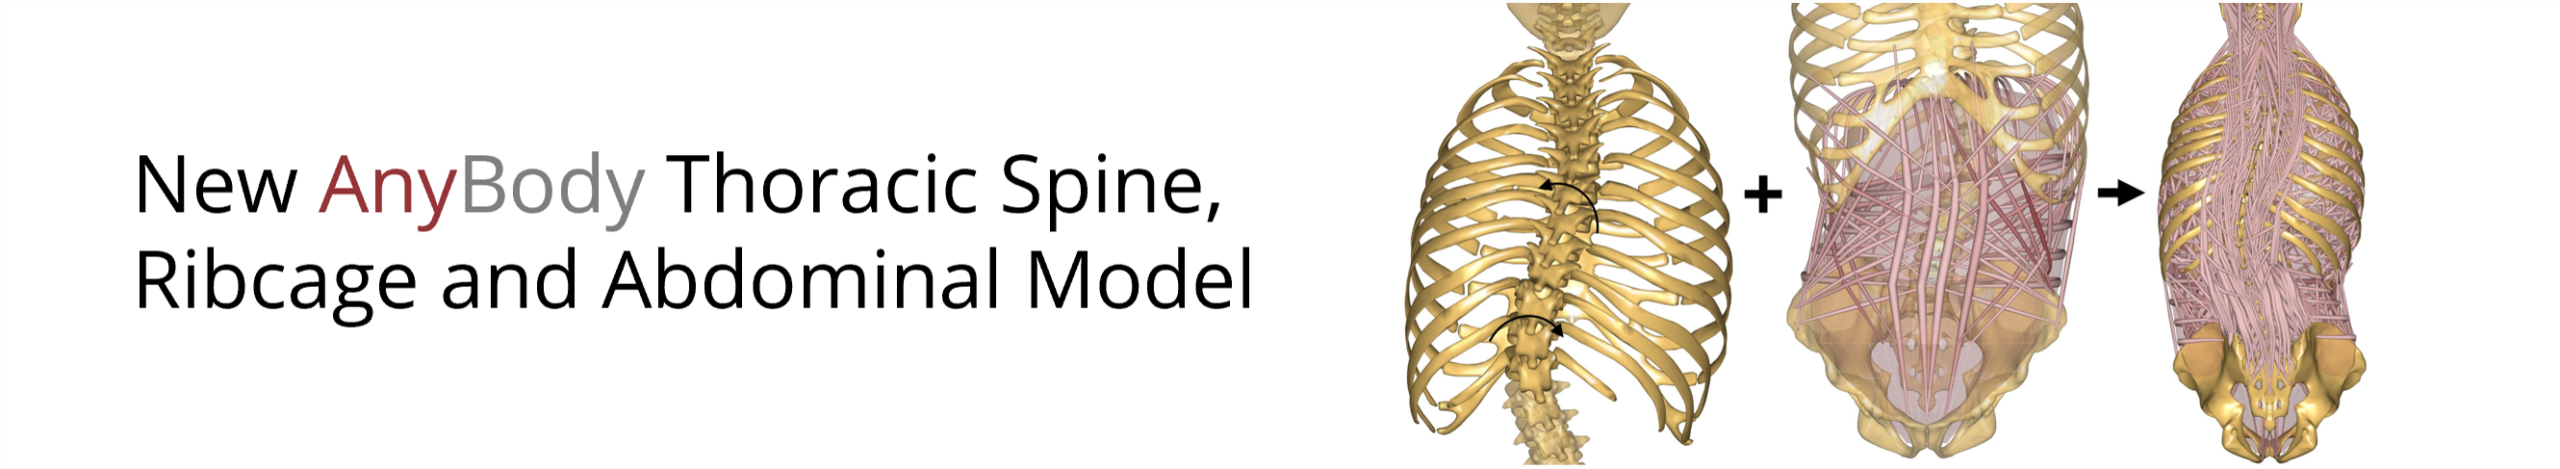 New AnyBody Thoracic Spine, Ribcage and Abdominal Model